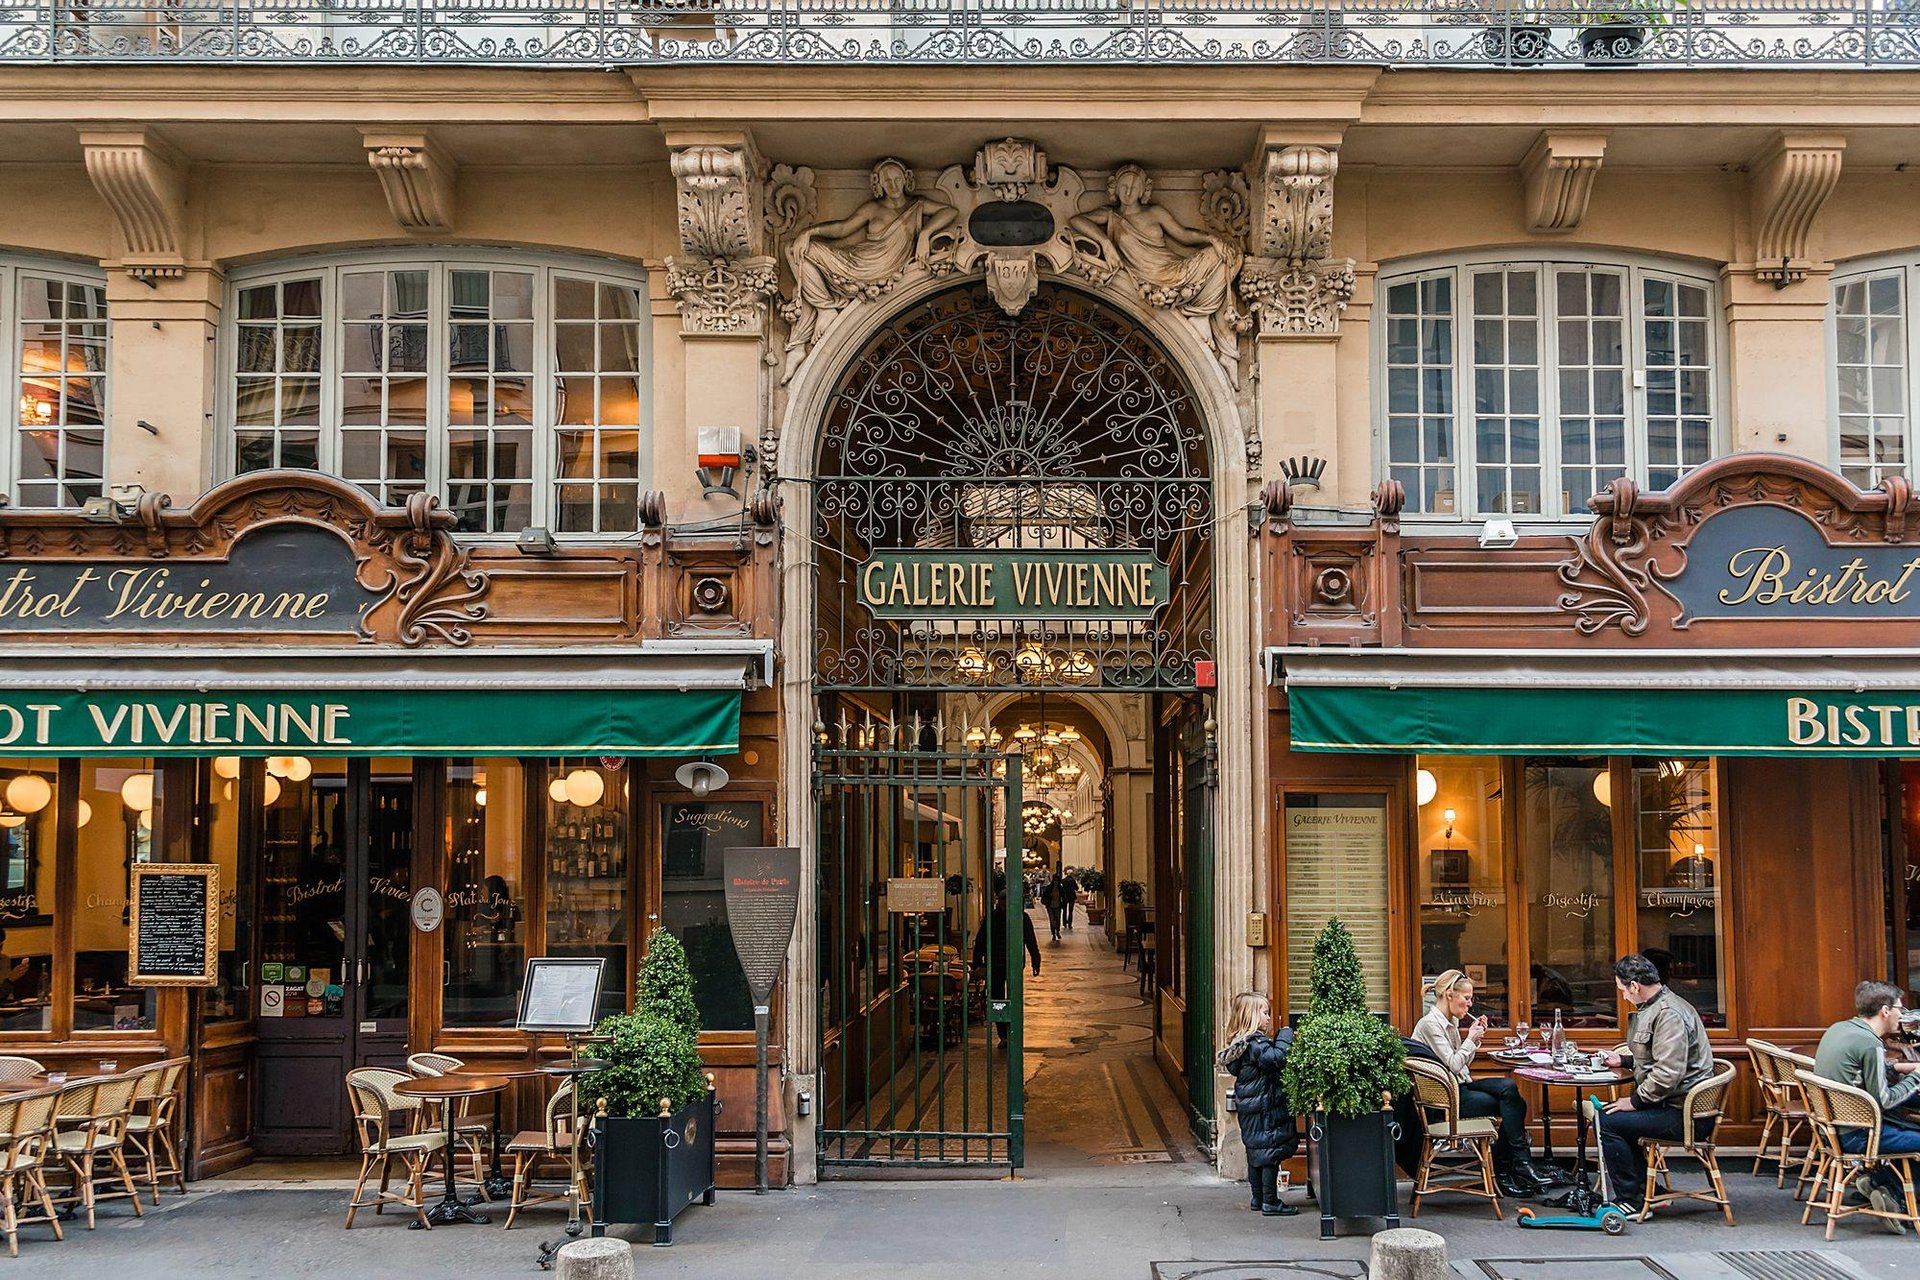 The Hotel Gramont close to the "Passage Vivienne" reminds the luxuruous past of the district